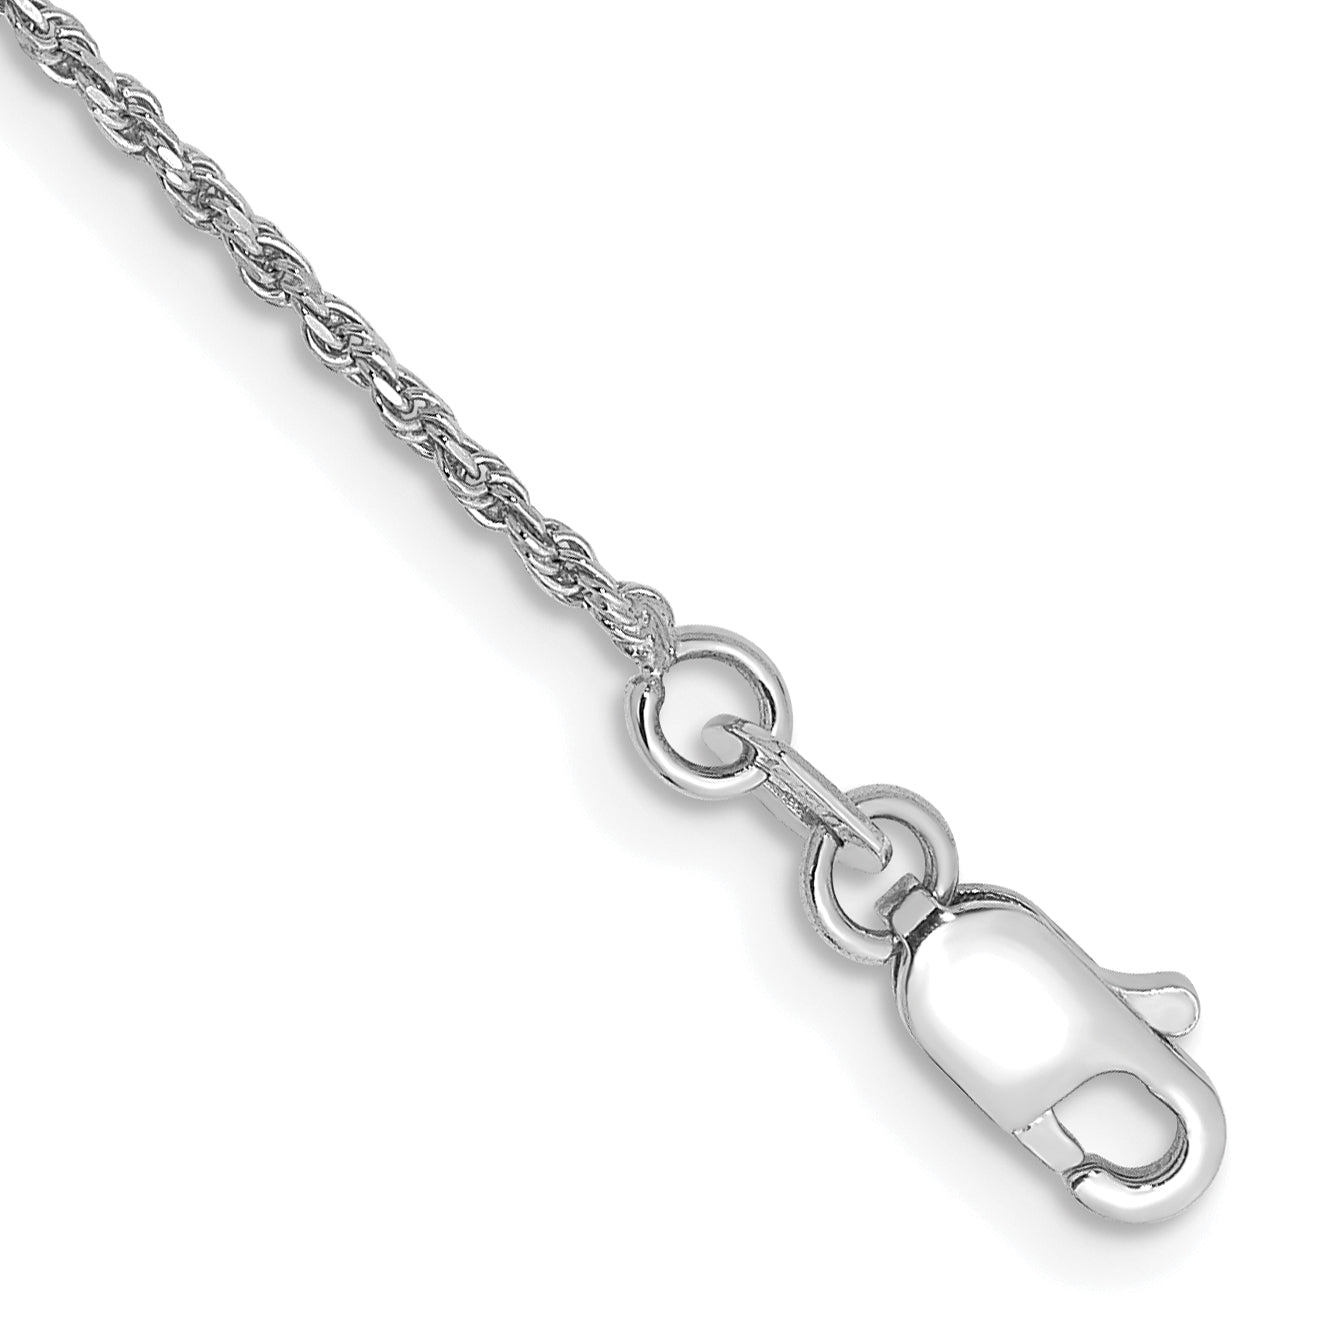 14K White Gold 10 inch 1.15mm Diamond-cut Machine Made Rope with Lobster Clasp Chain Anklet